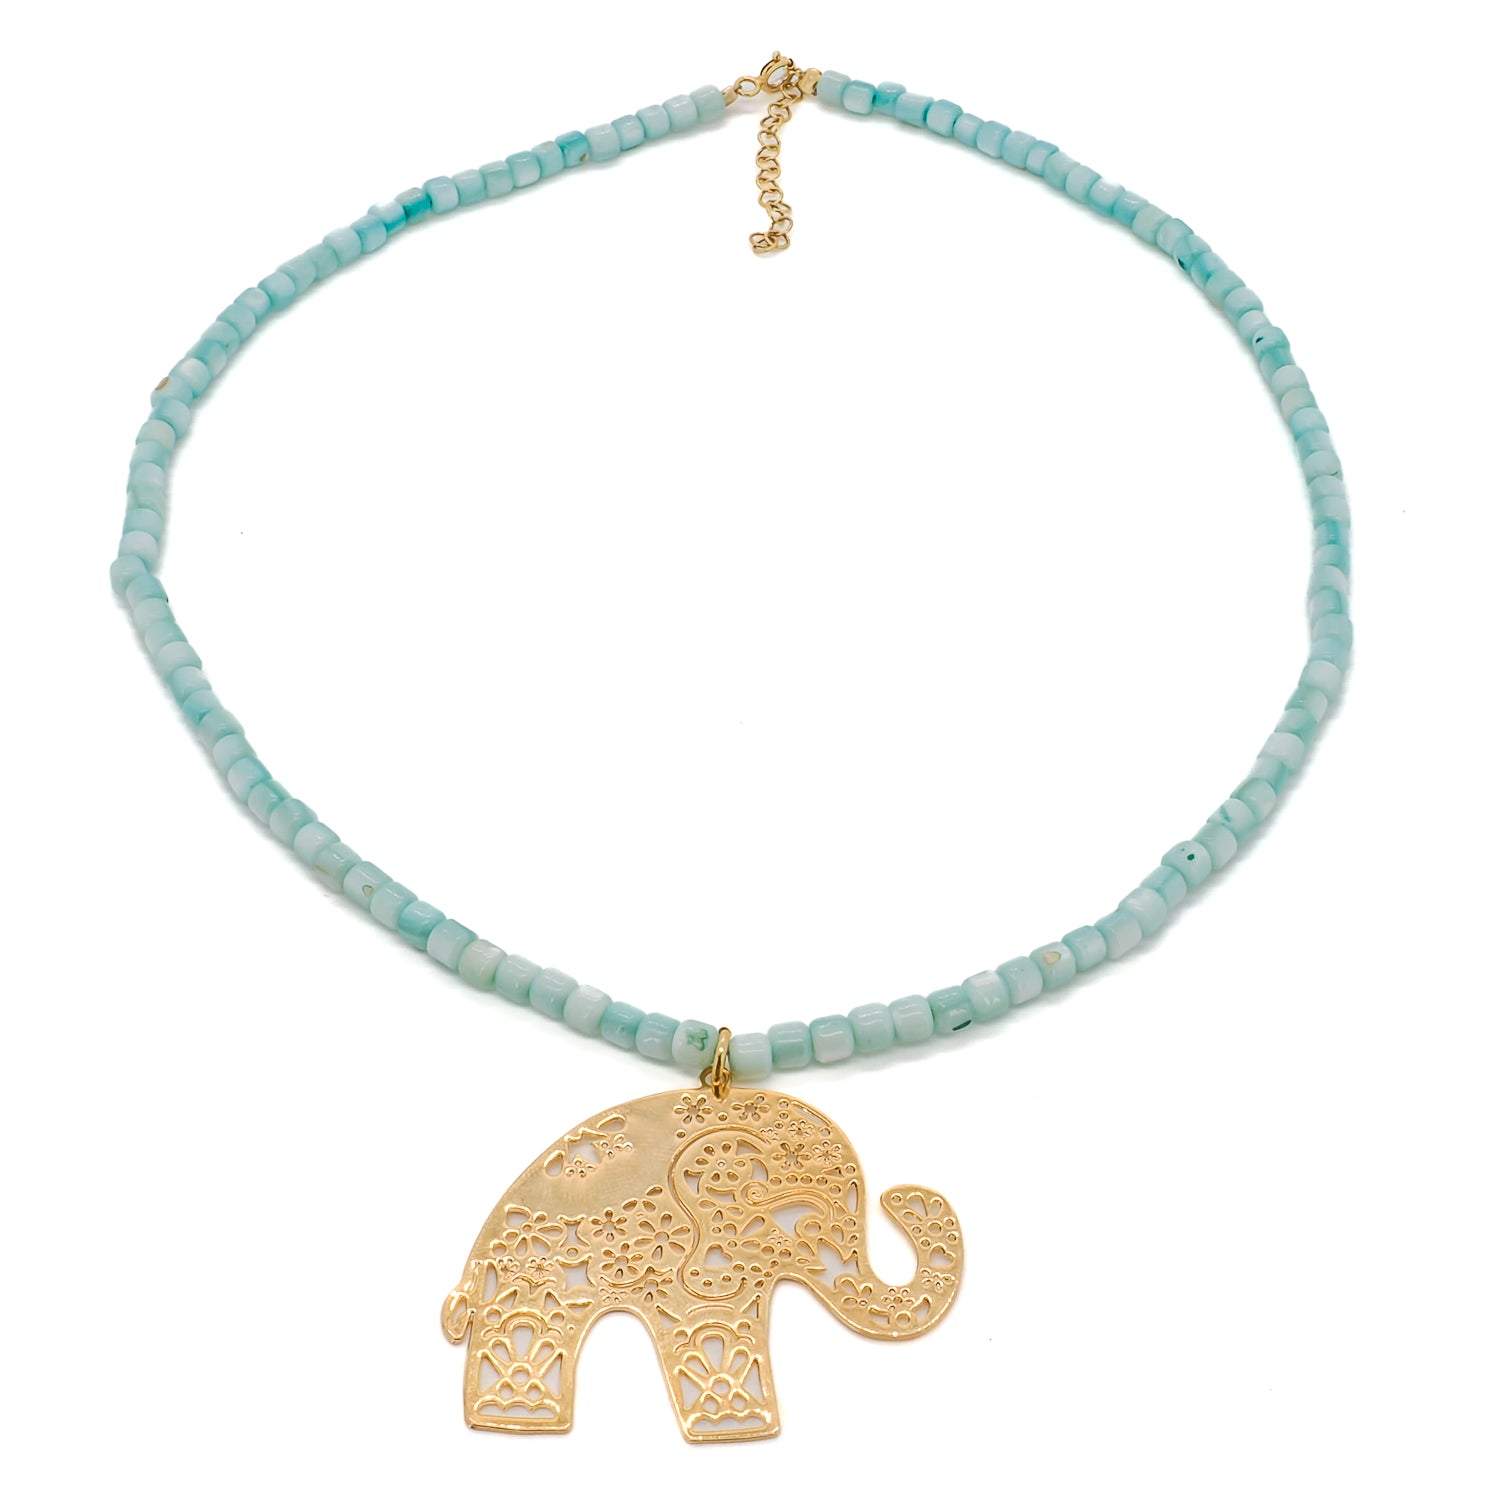 Unique Bohemian Style Necklace with Elephant Charm and Blue Pearl Crystals